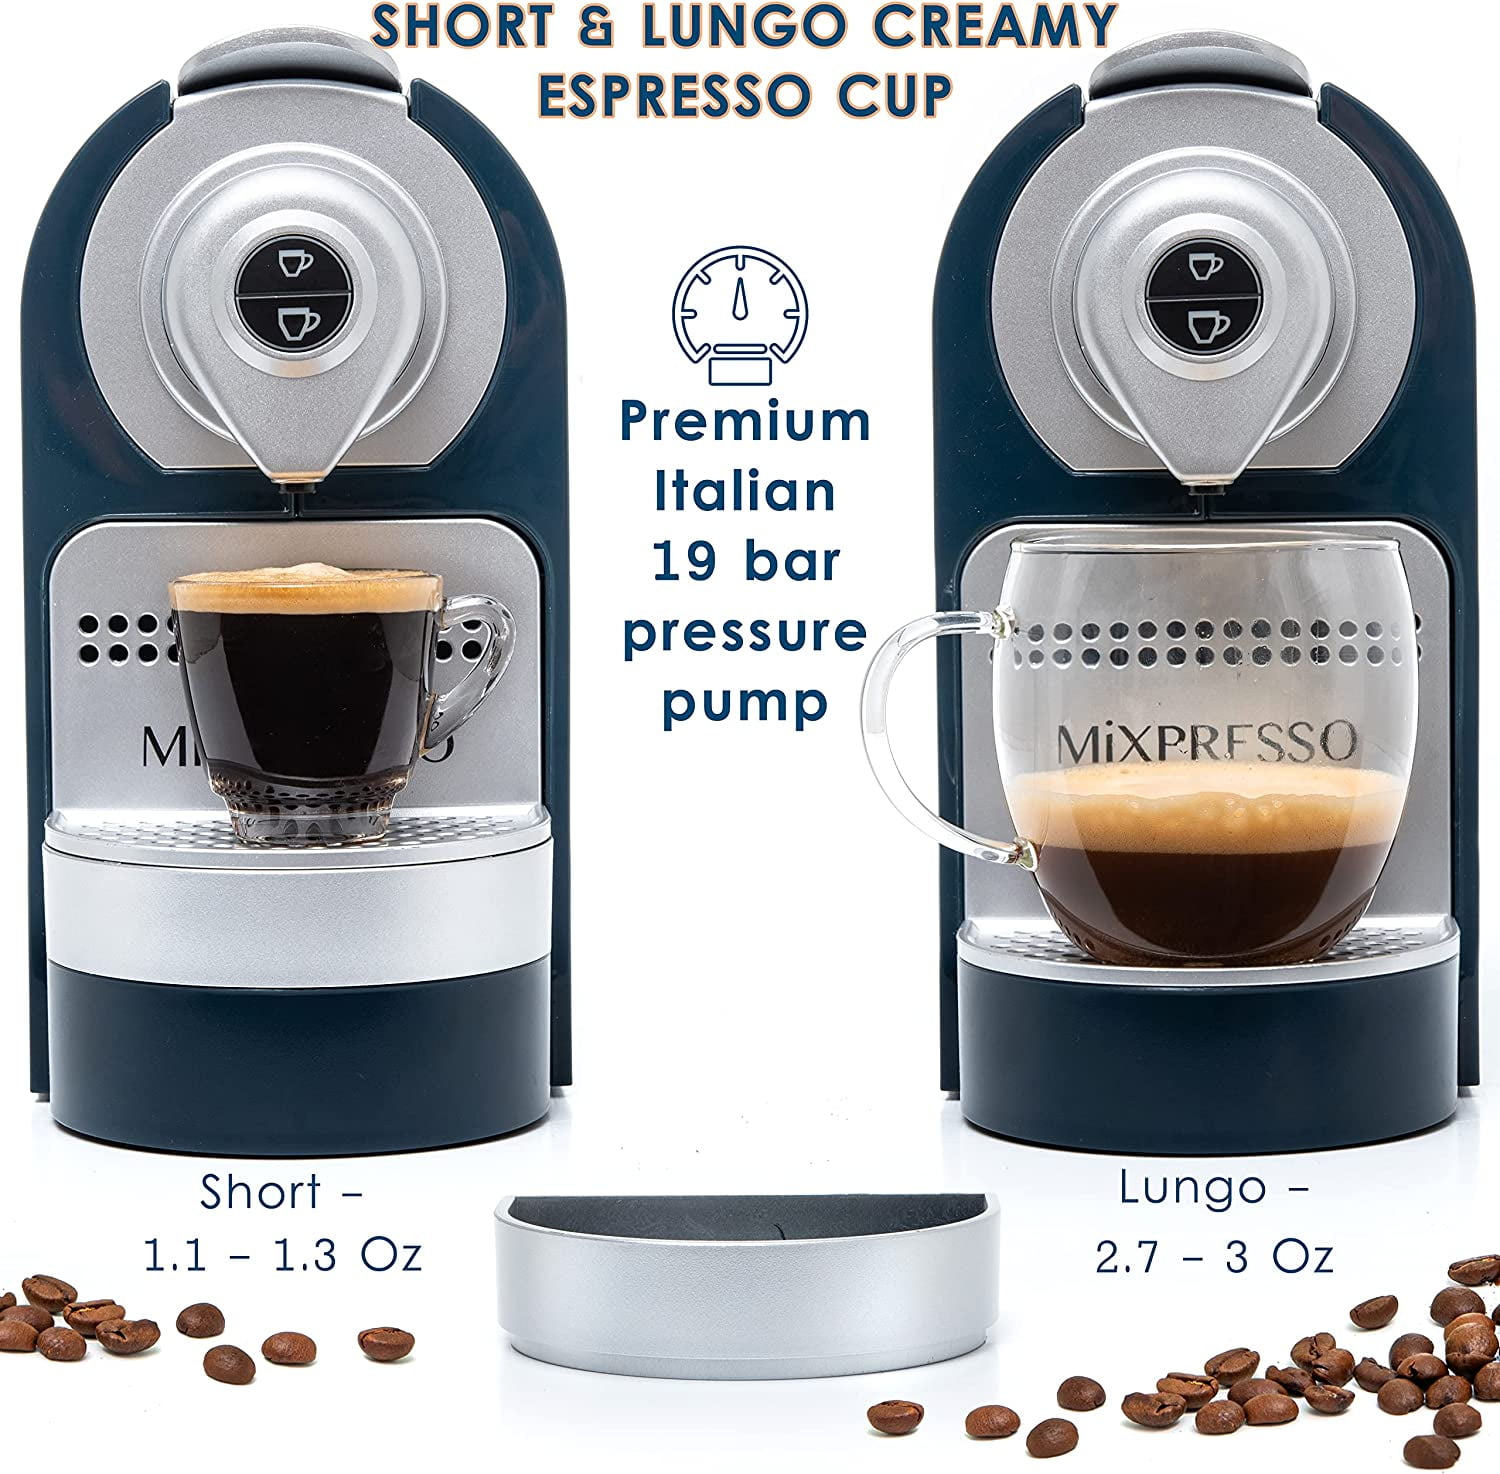 Mixpresso Espresso Coffee Capsules Compatible with Nespresso Original Line  Brewers, Single-Cup Coffee Pods, 100% Italian Coffee, Lungo Strong Coffee